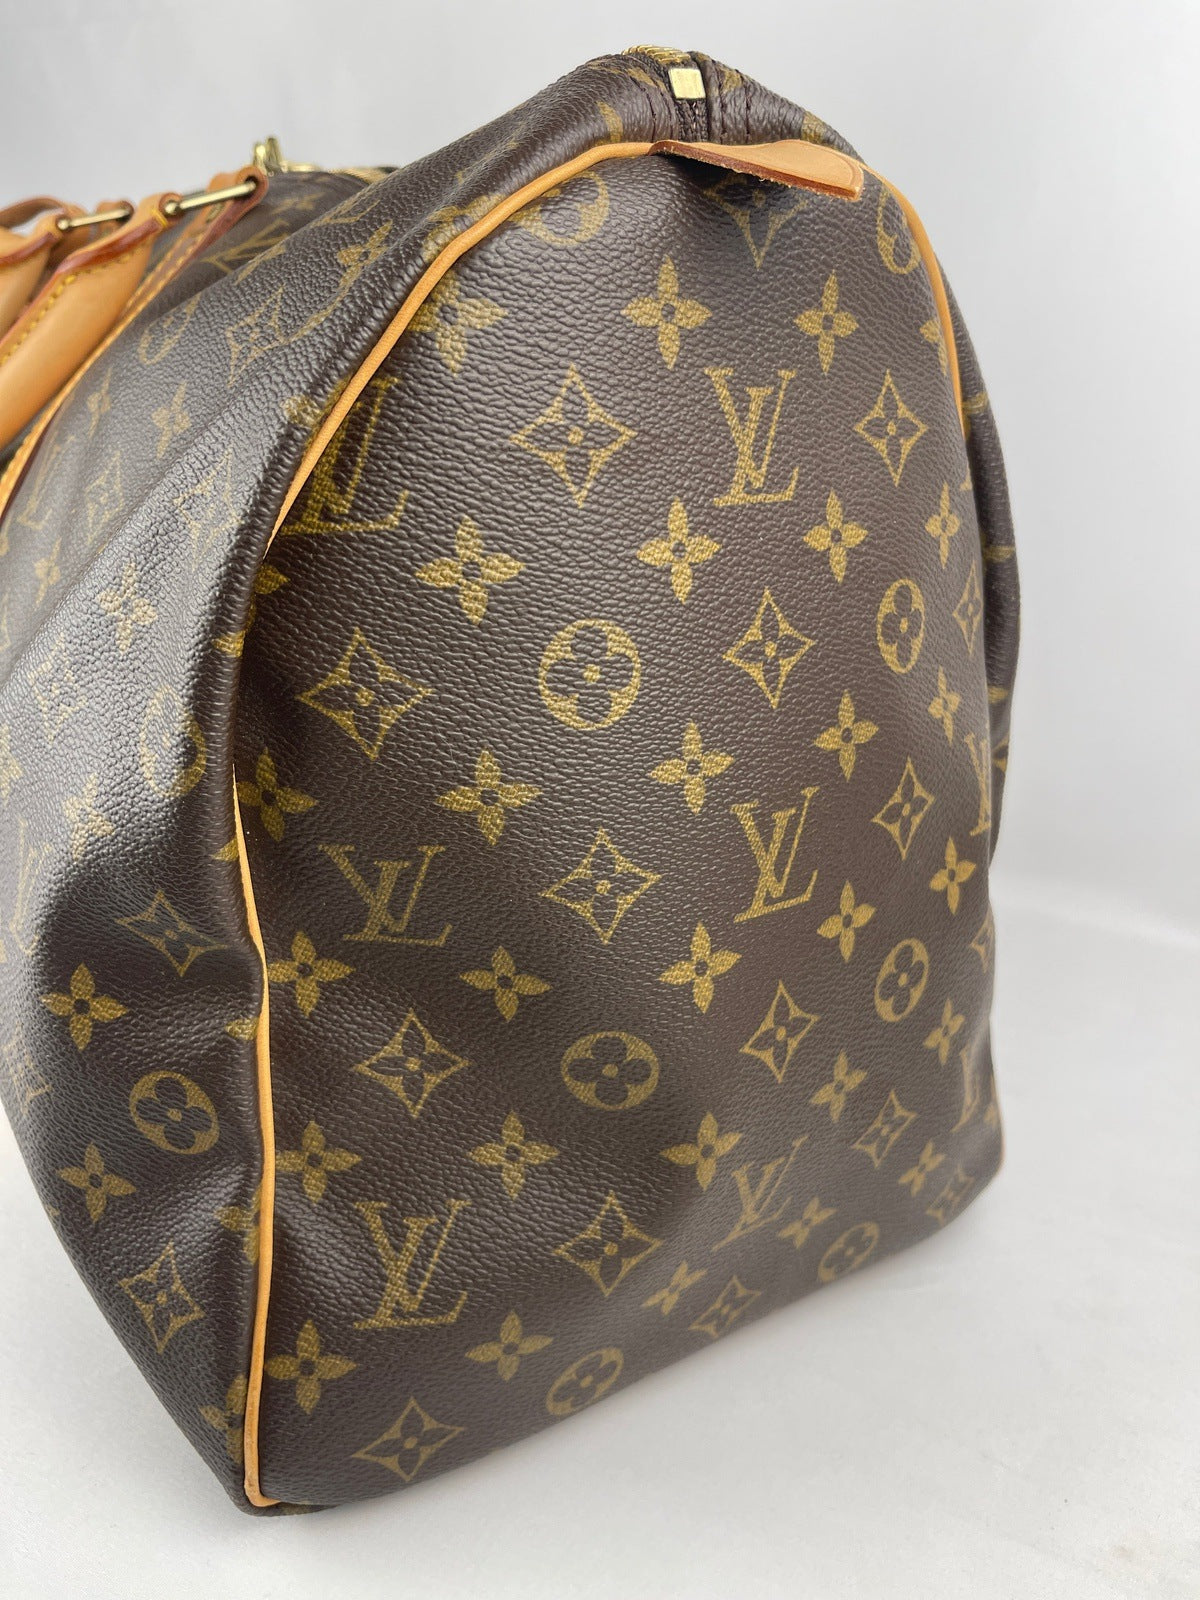 How to tie a bow on a Louis Vuitton Speedy 30 - The Dahlia look